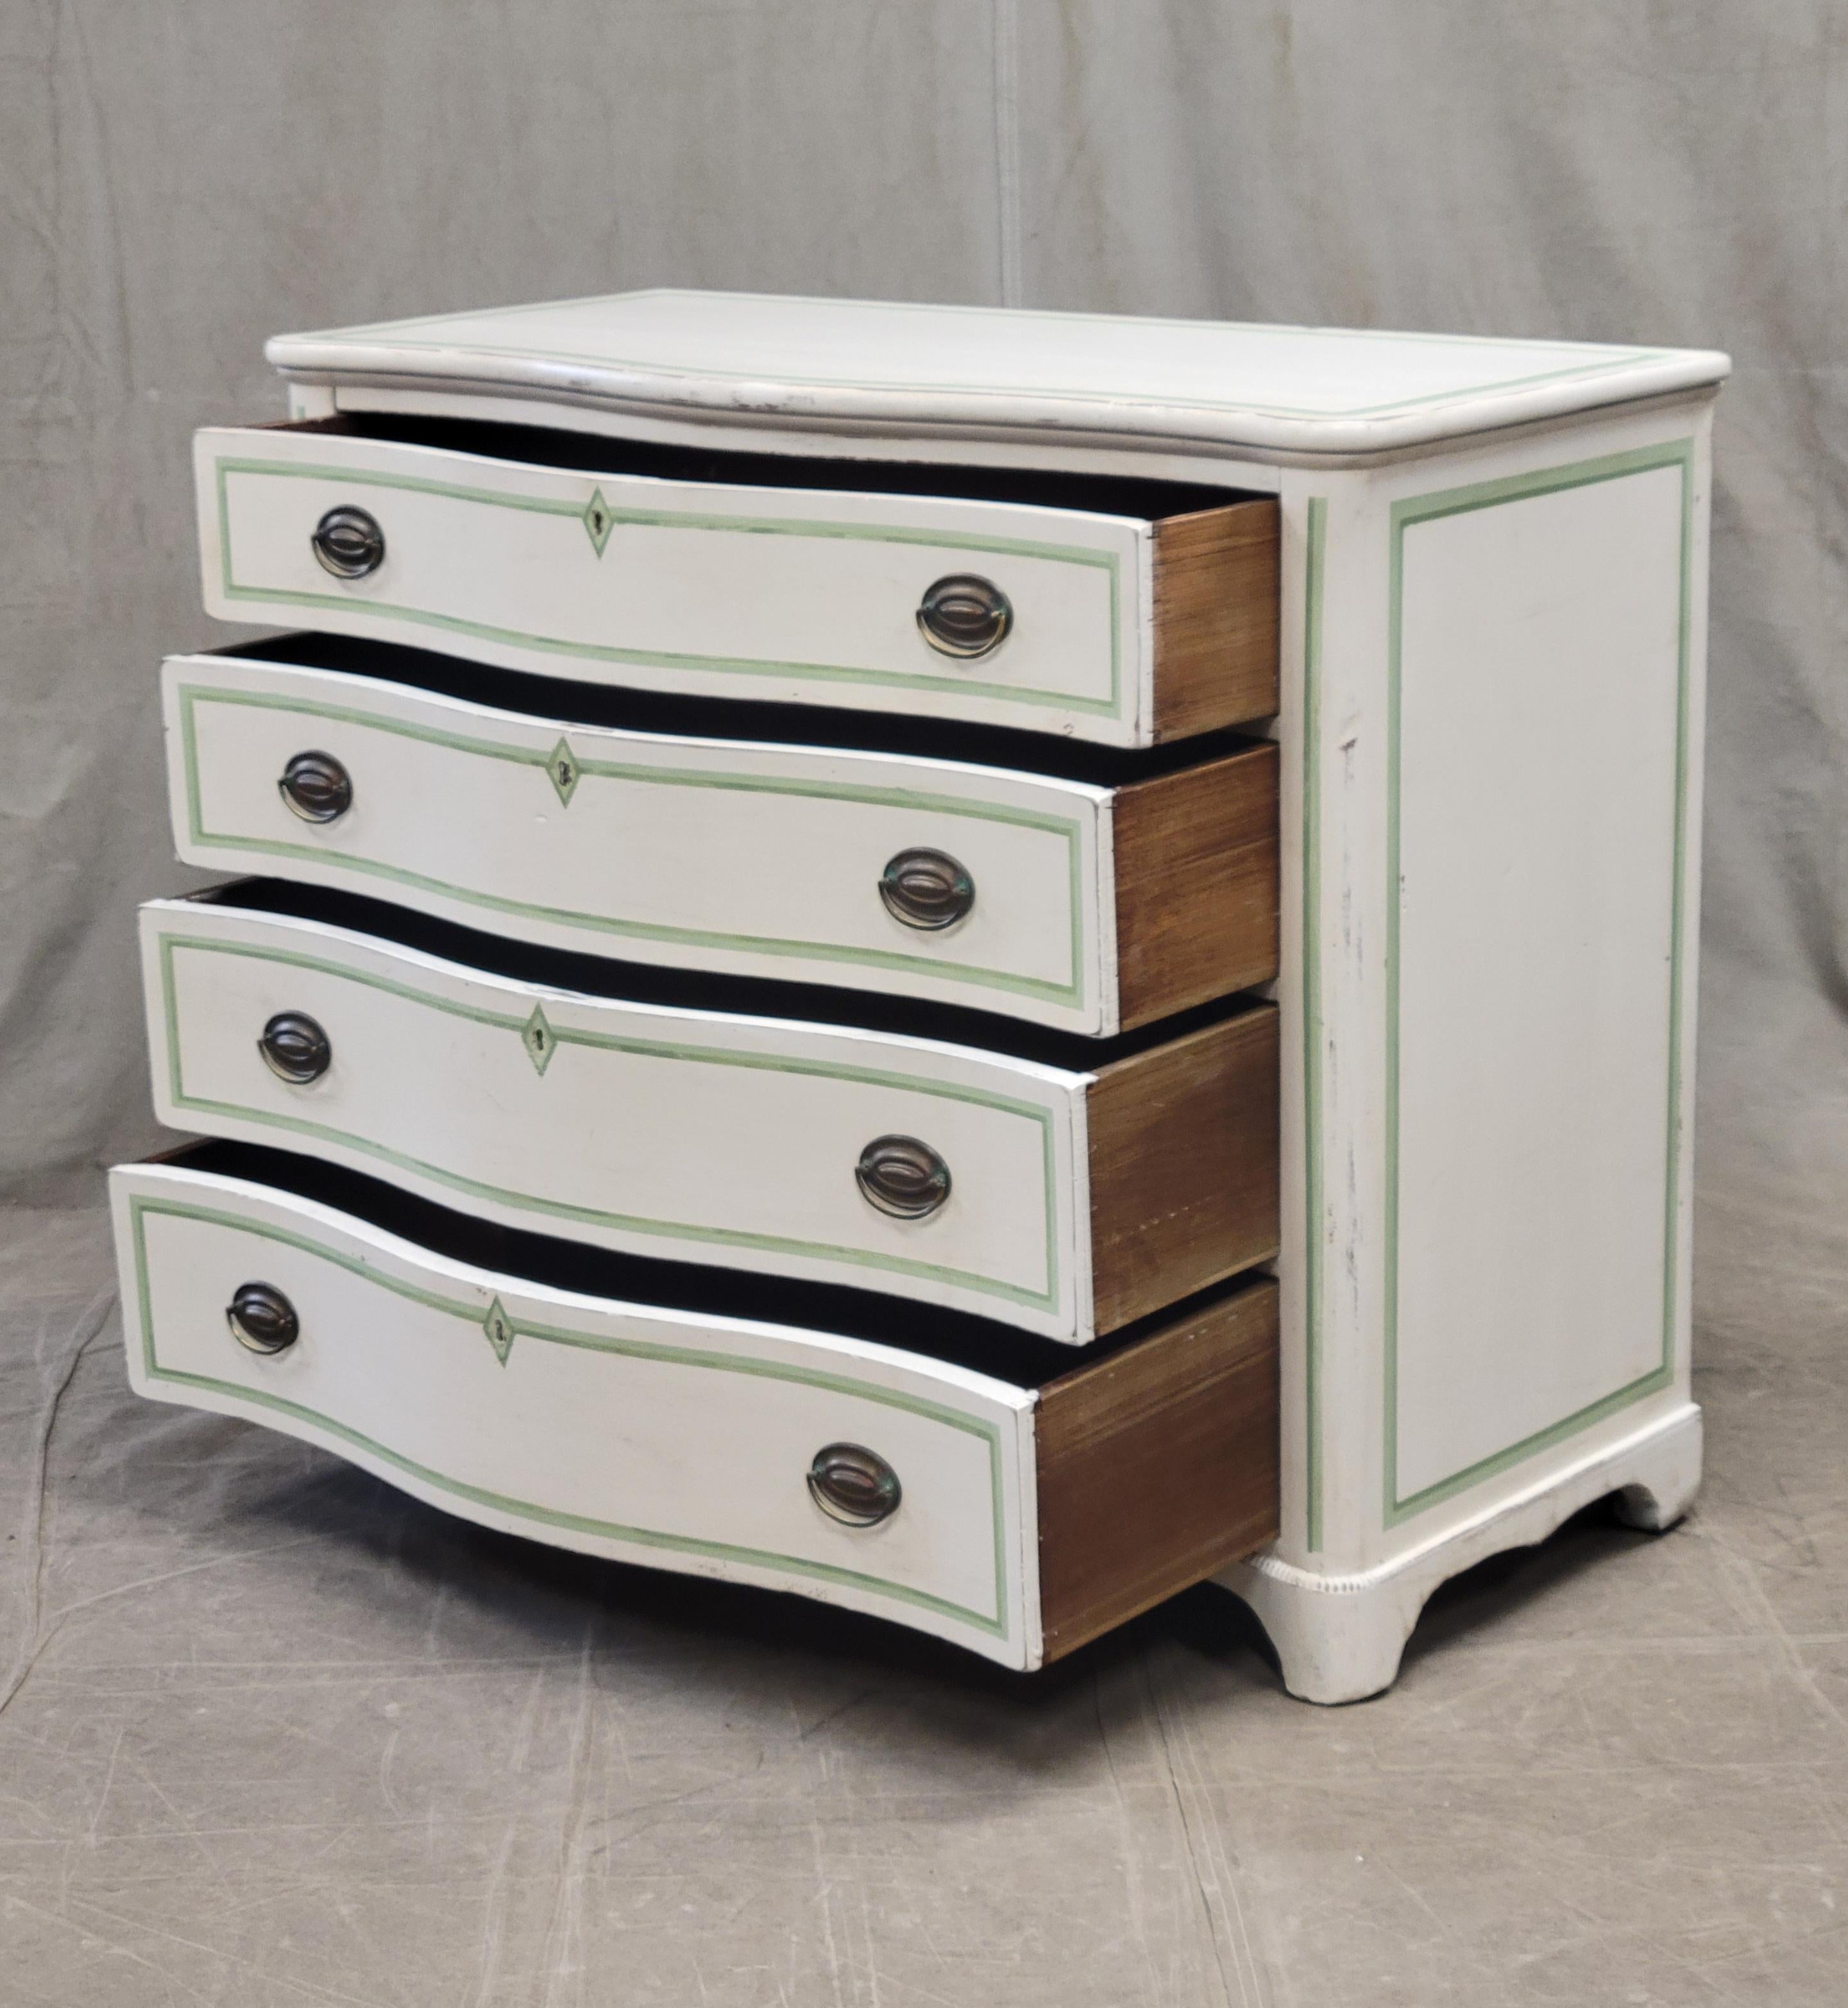 Neoclassical Antique Serpentine Front Dresser Painted White With Green French Line Motif For Sale